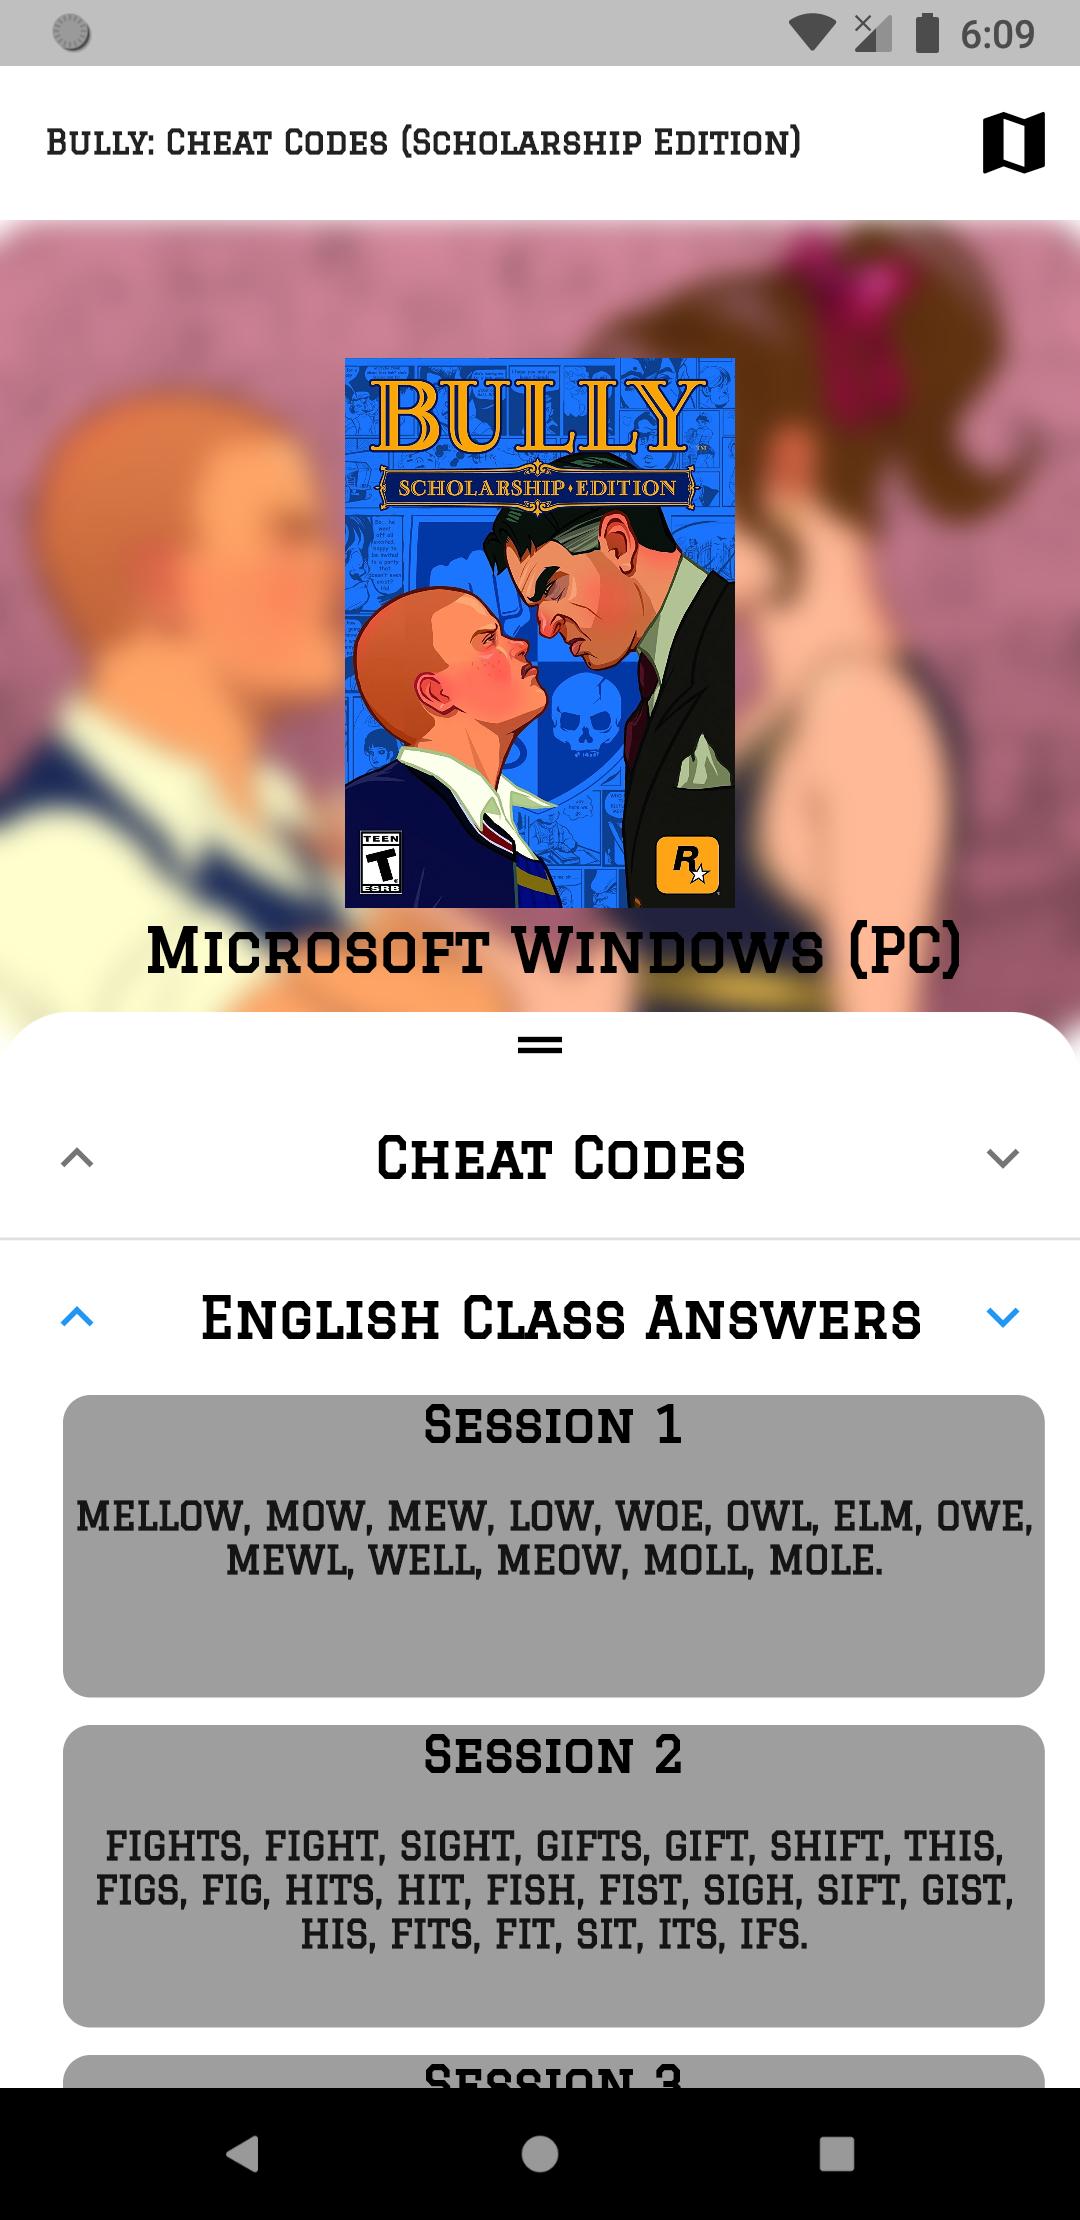 Bully: Cheat Codes - Scholarship Edition for Android - APK Download